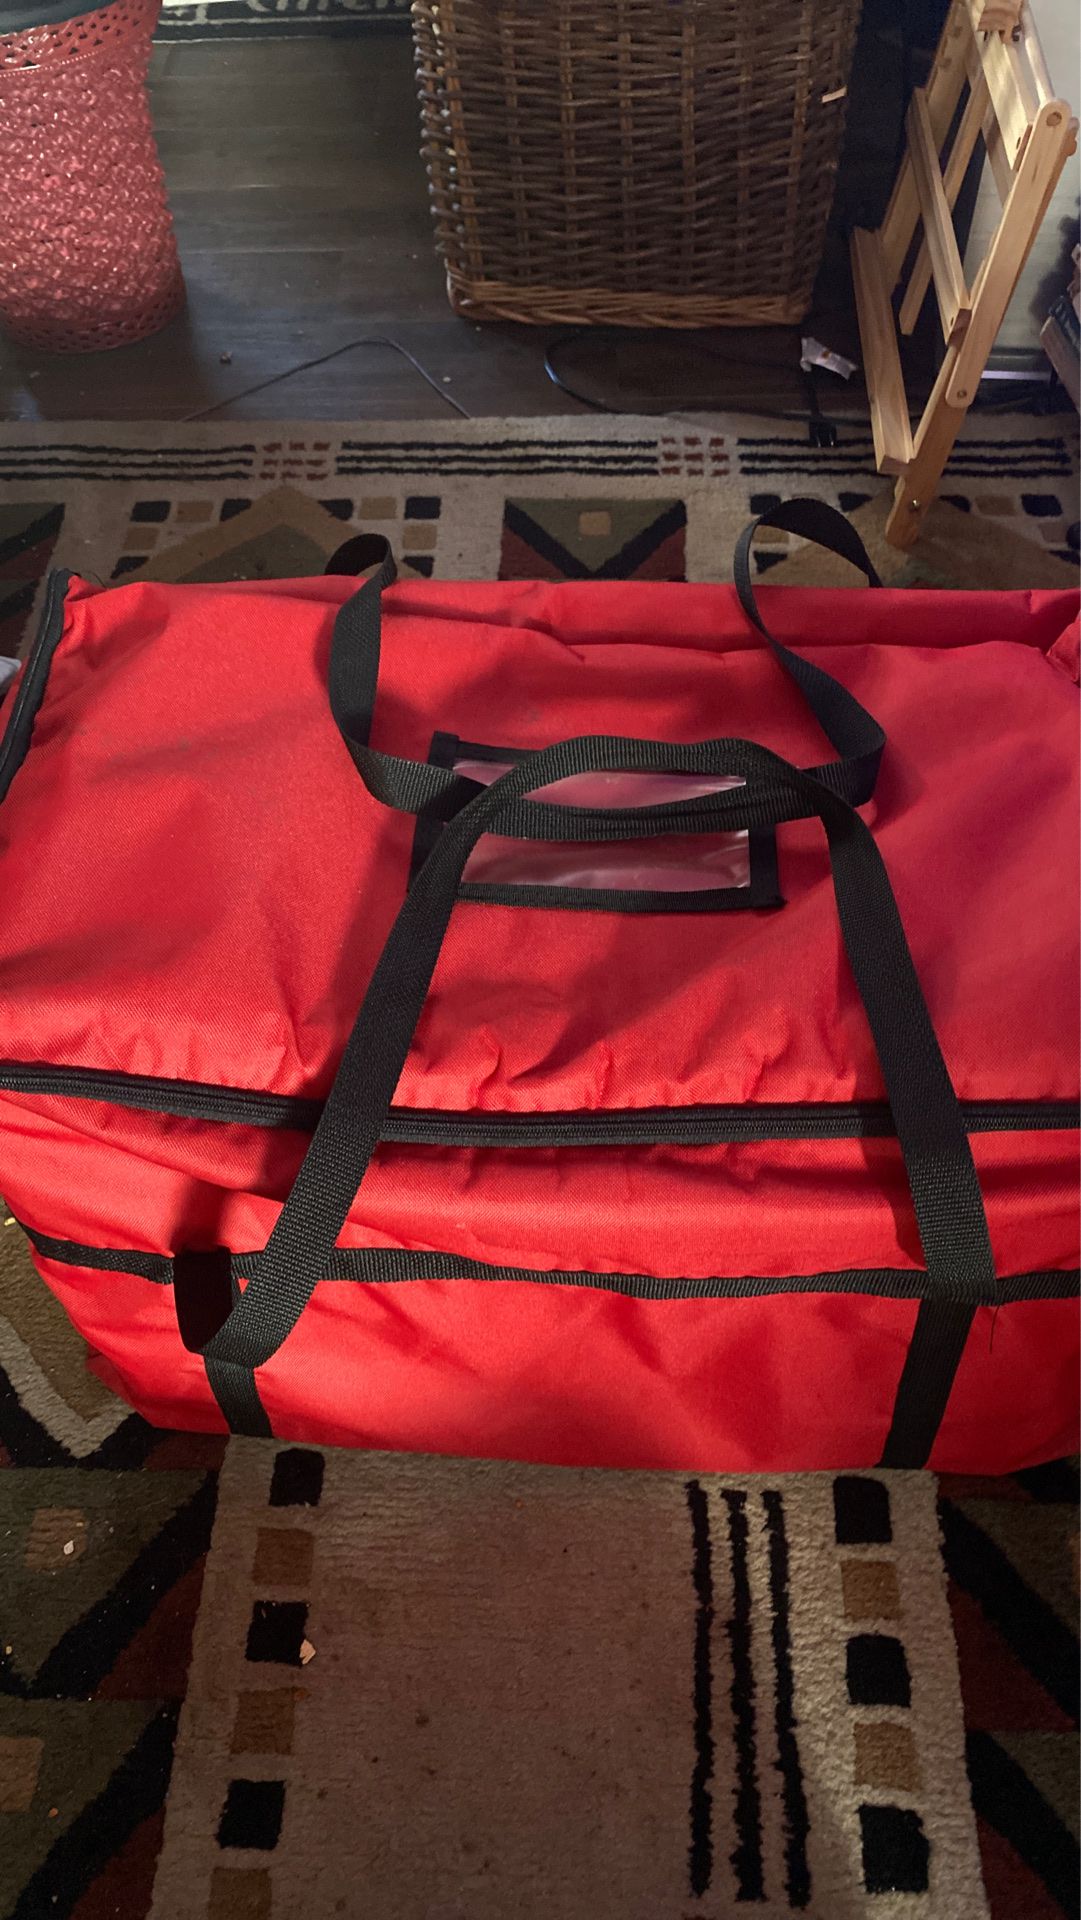 Insulated Leakproof Cooler Bag / Soft Cooler, Red Nylon, 22" x 13" x 14"